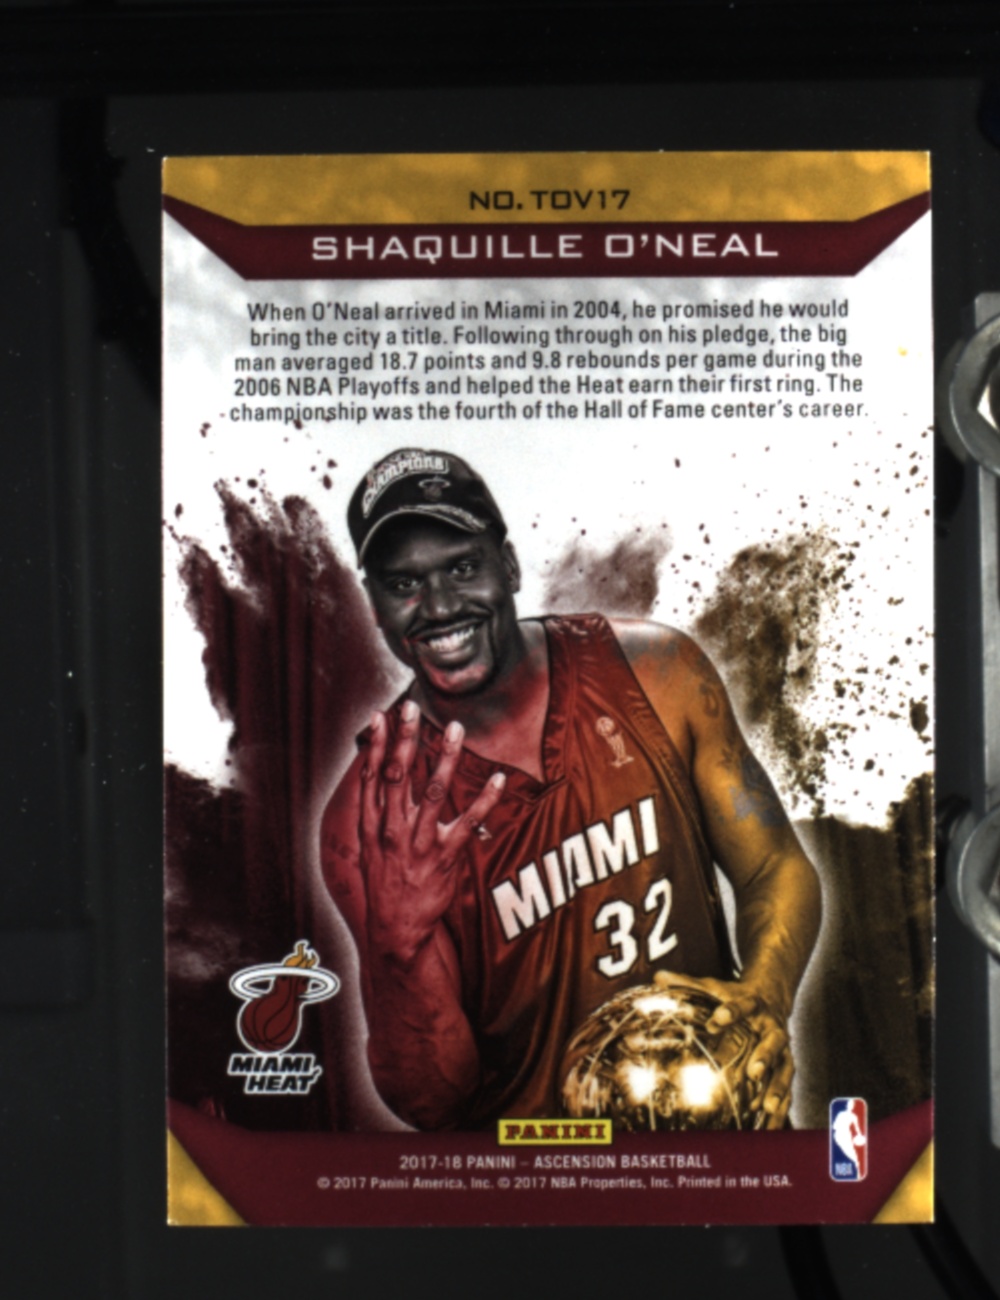 【UCS拍卖 wl0106】2017-18 Panini Ascension 特卡 折射 Thrill of Victory - Shaquille O'Neal 沙奎尔-奥尼尔